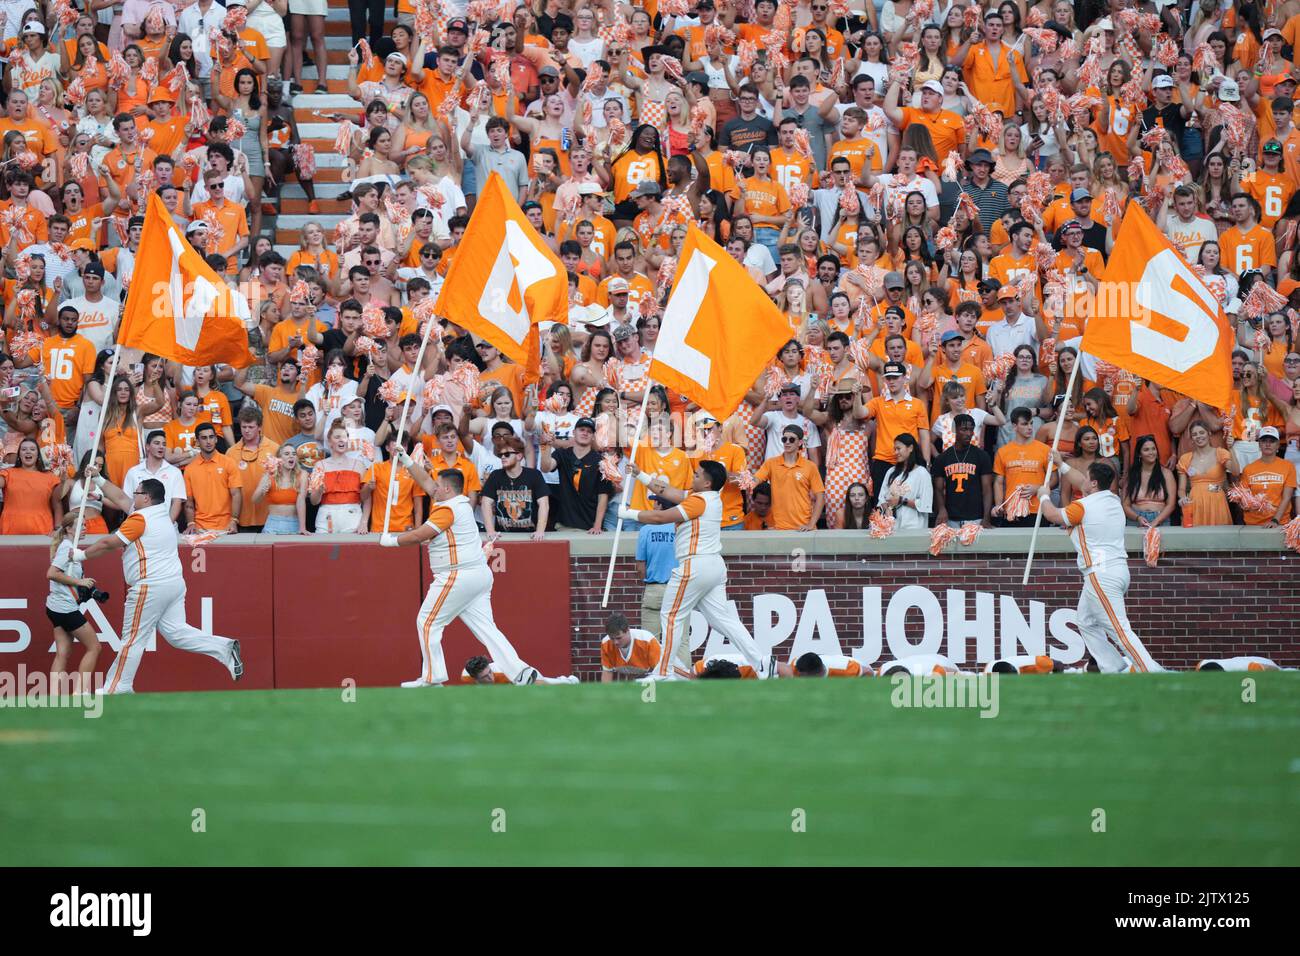 September 1, 2022: Tennessee Volunteers cheerleaders celebrate a touchdown during the NCAA football game between the University of Tennessee Volunteers and the Ball State Cardinals at Neyland Stadium in Knoxville TN Tim Gangloff/CSM Stock Photo